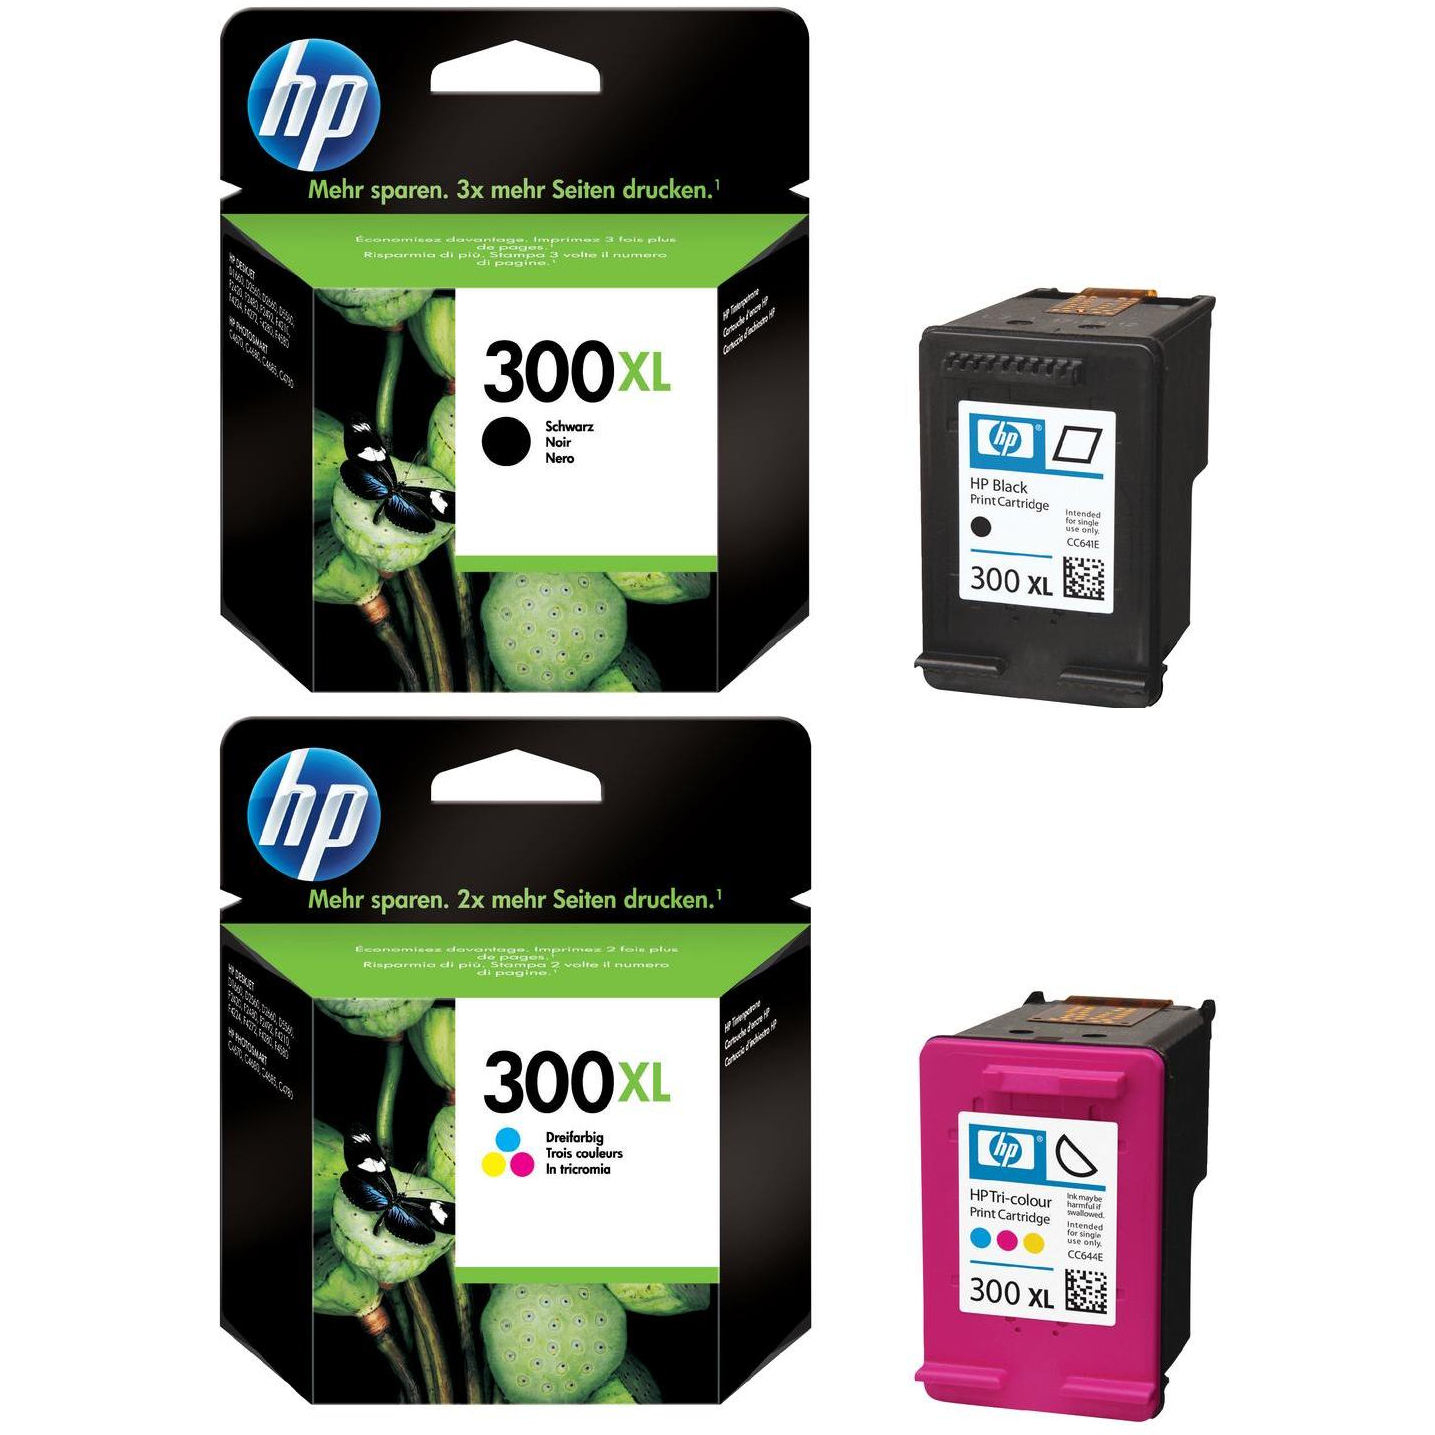 Related to HP PHOTOSMART 240: HP-300XL-Pack